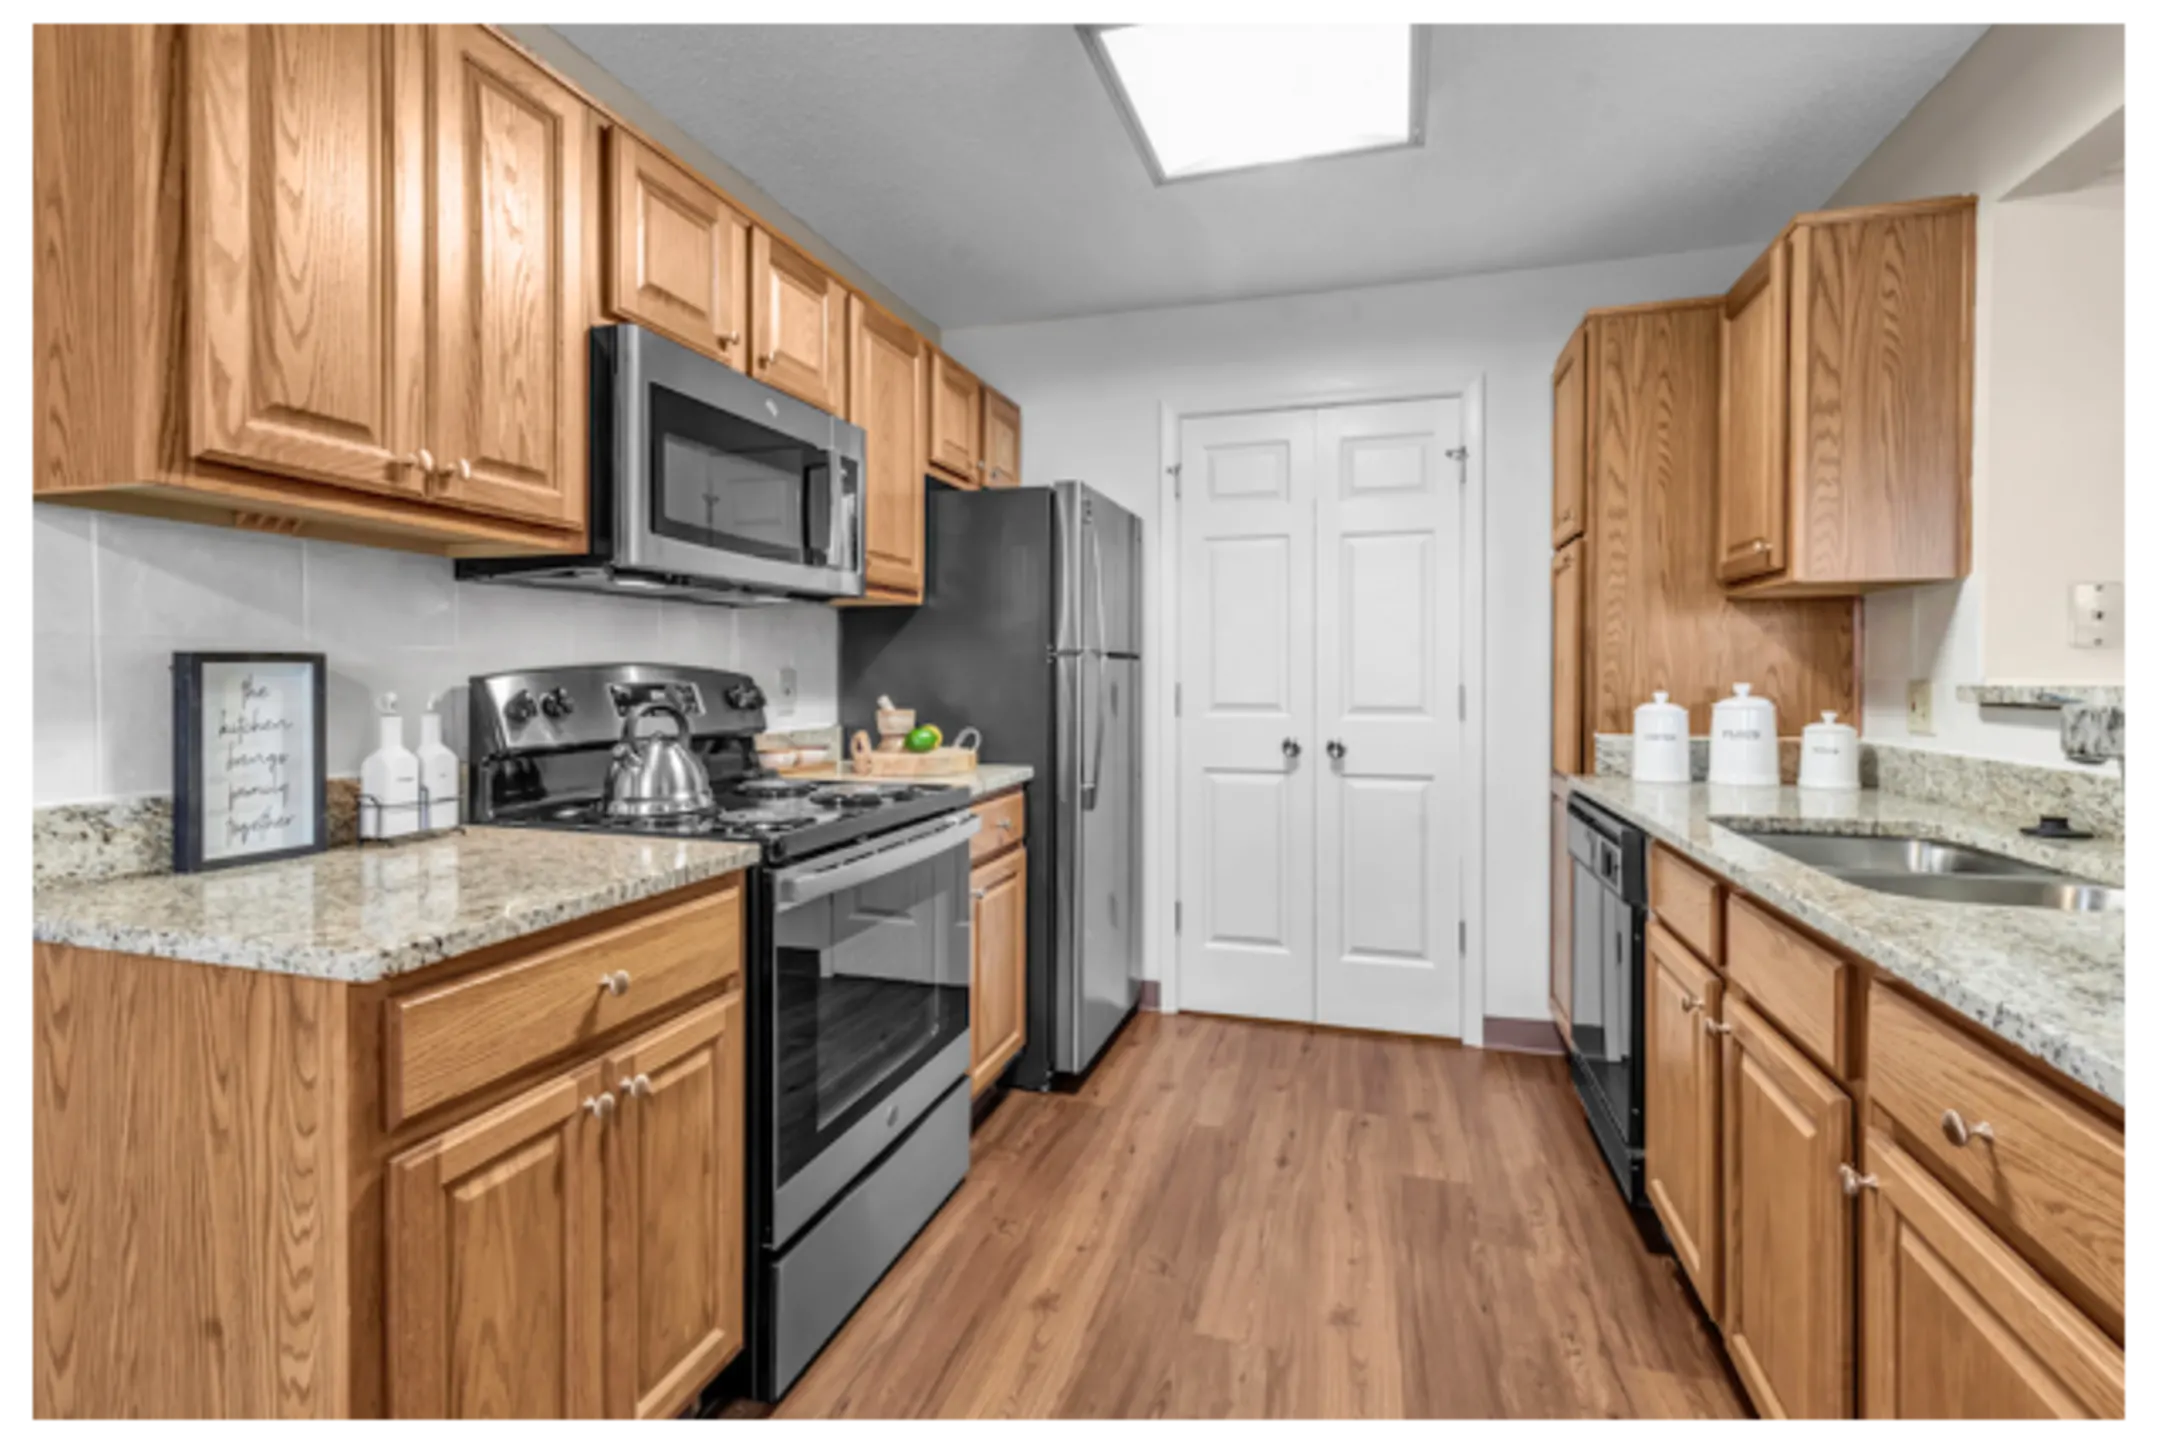 Kitchen - Windsong Place Apartments - Williamsville, NY